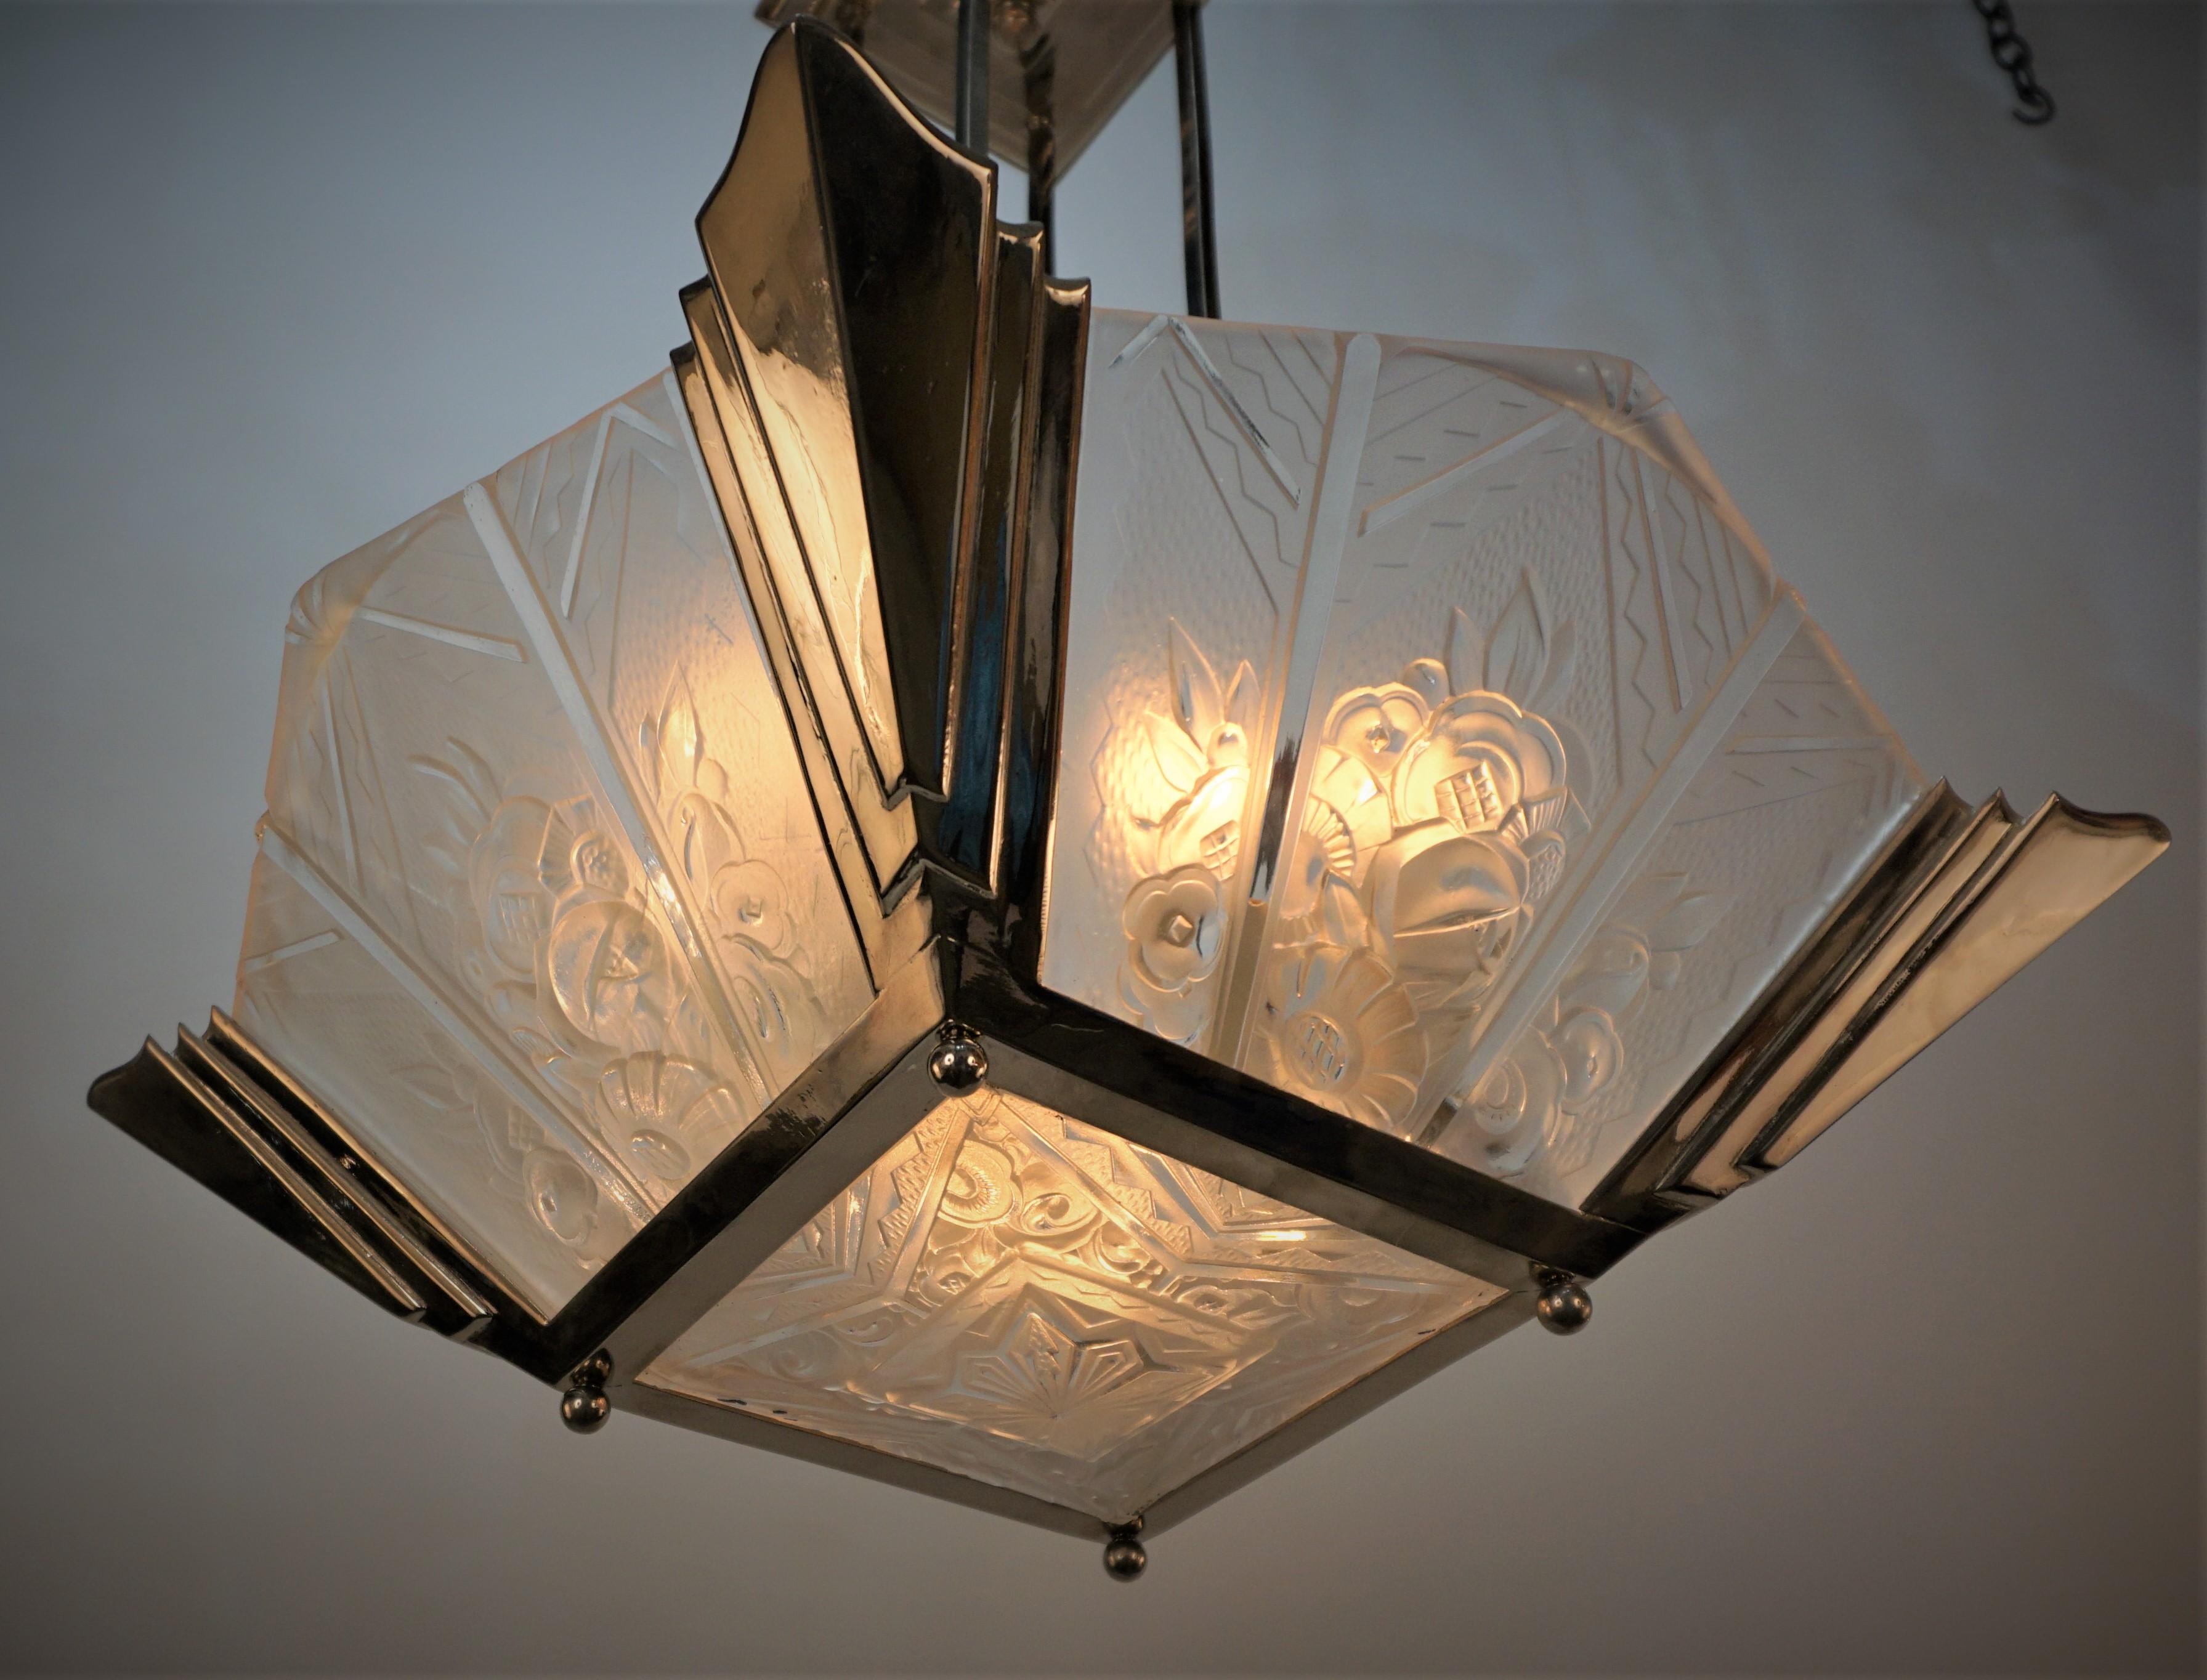 Clear frost glass in flora art deco style with nickel on bronze frame.
Total of 10 lights 75watts max each.